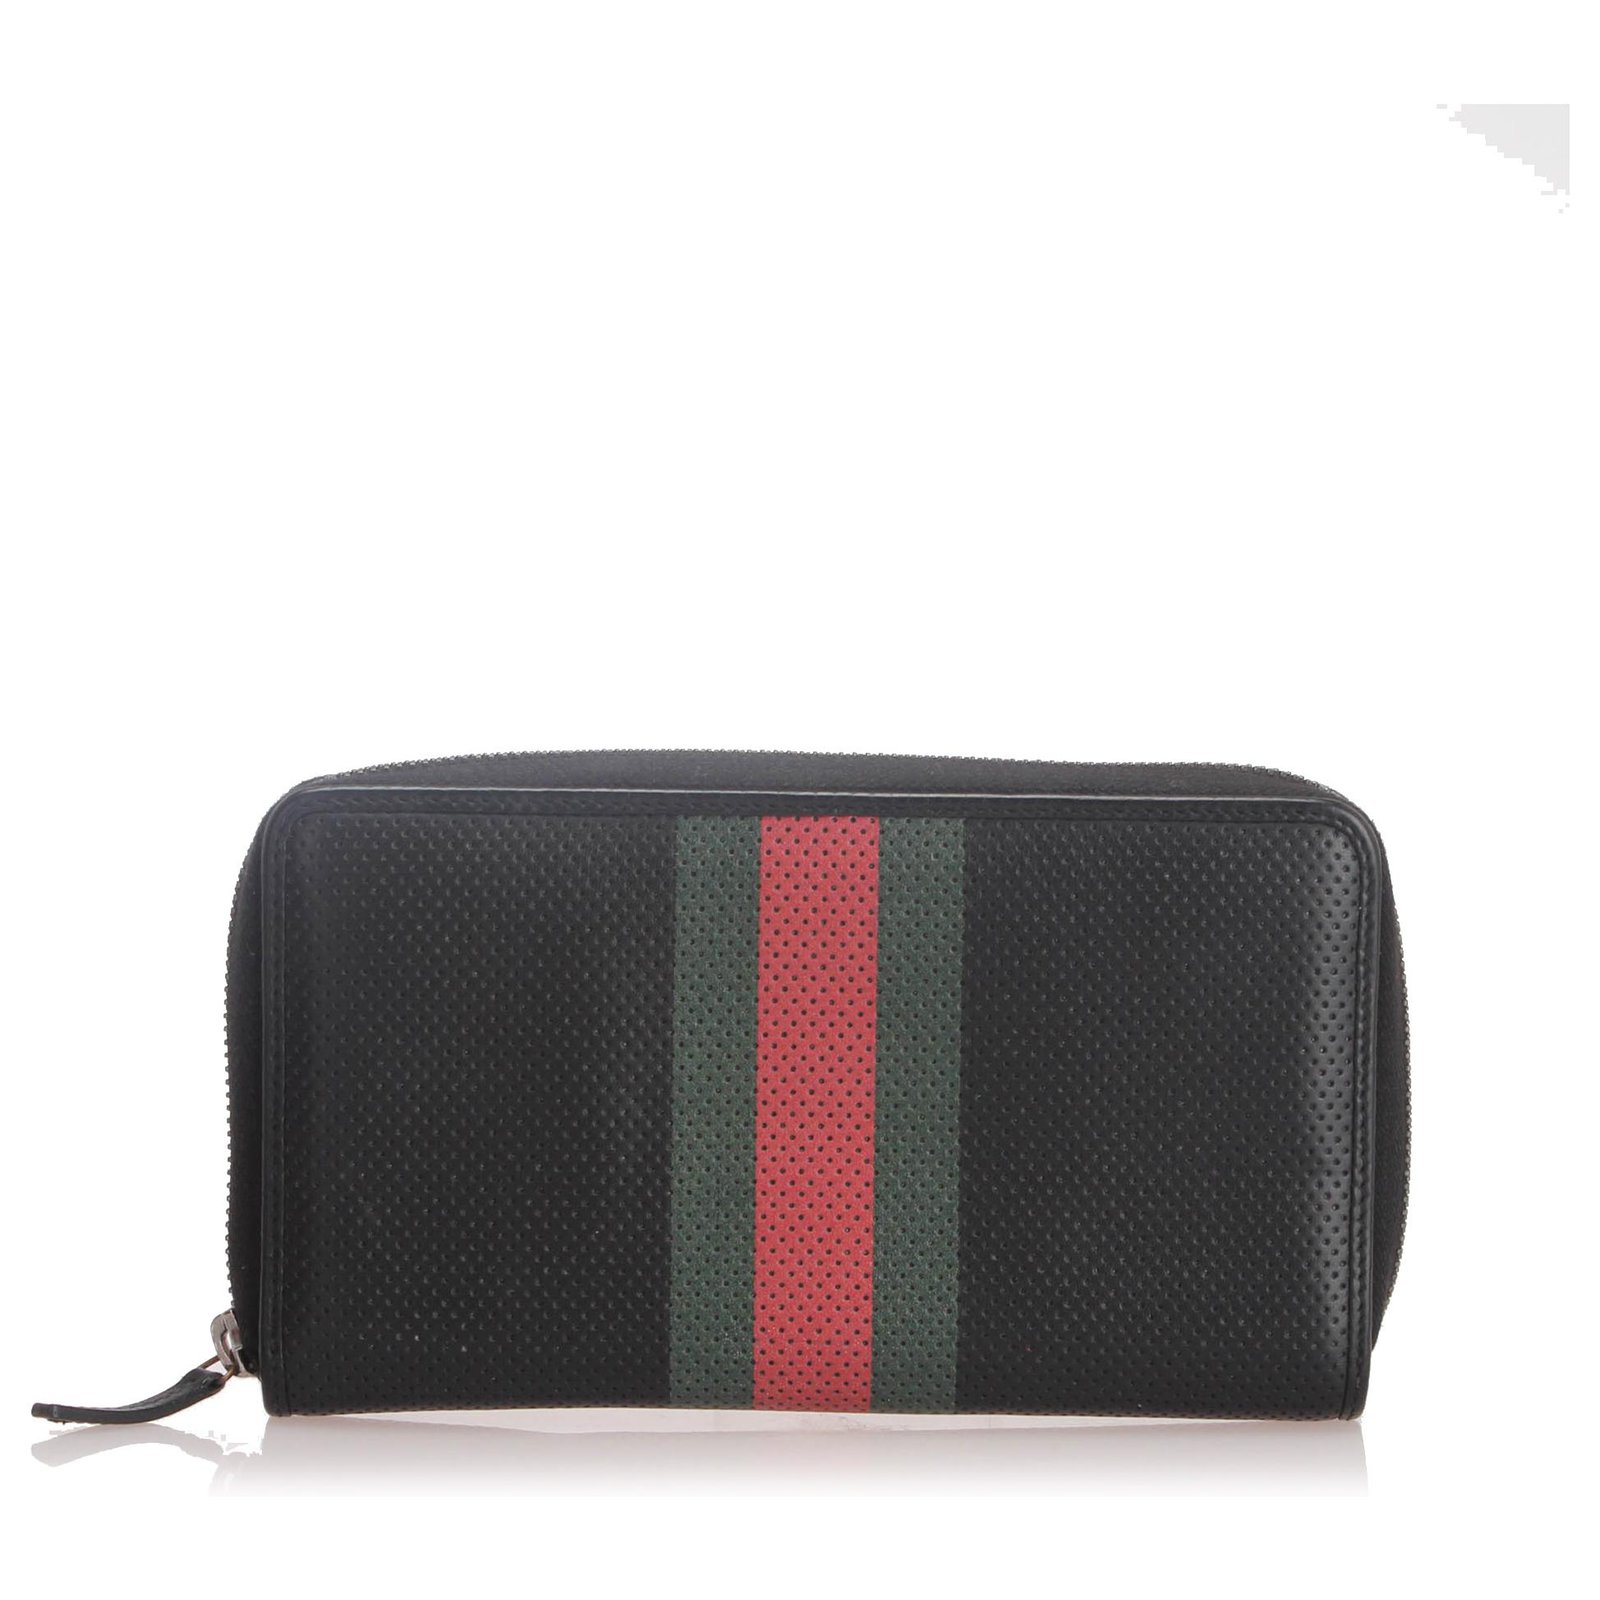 Gucci Black Web Perforated Leather Zip Around Wallet Multiple colors calfskin - Joli Closet